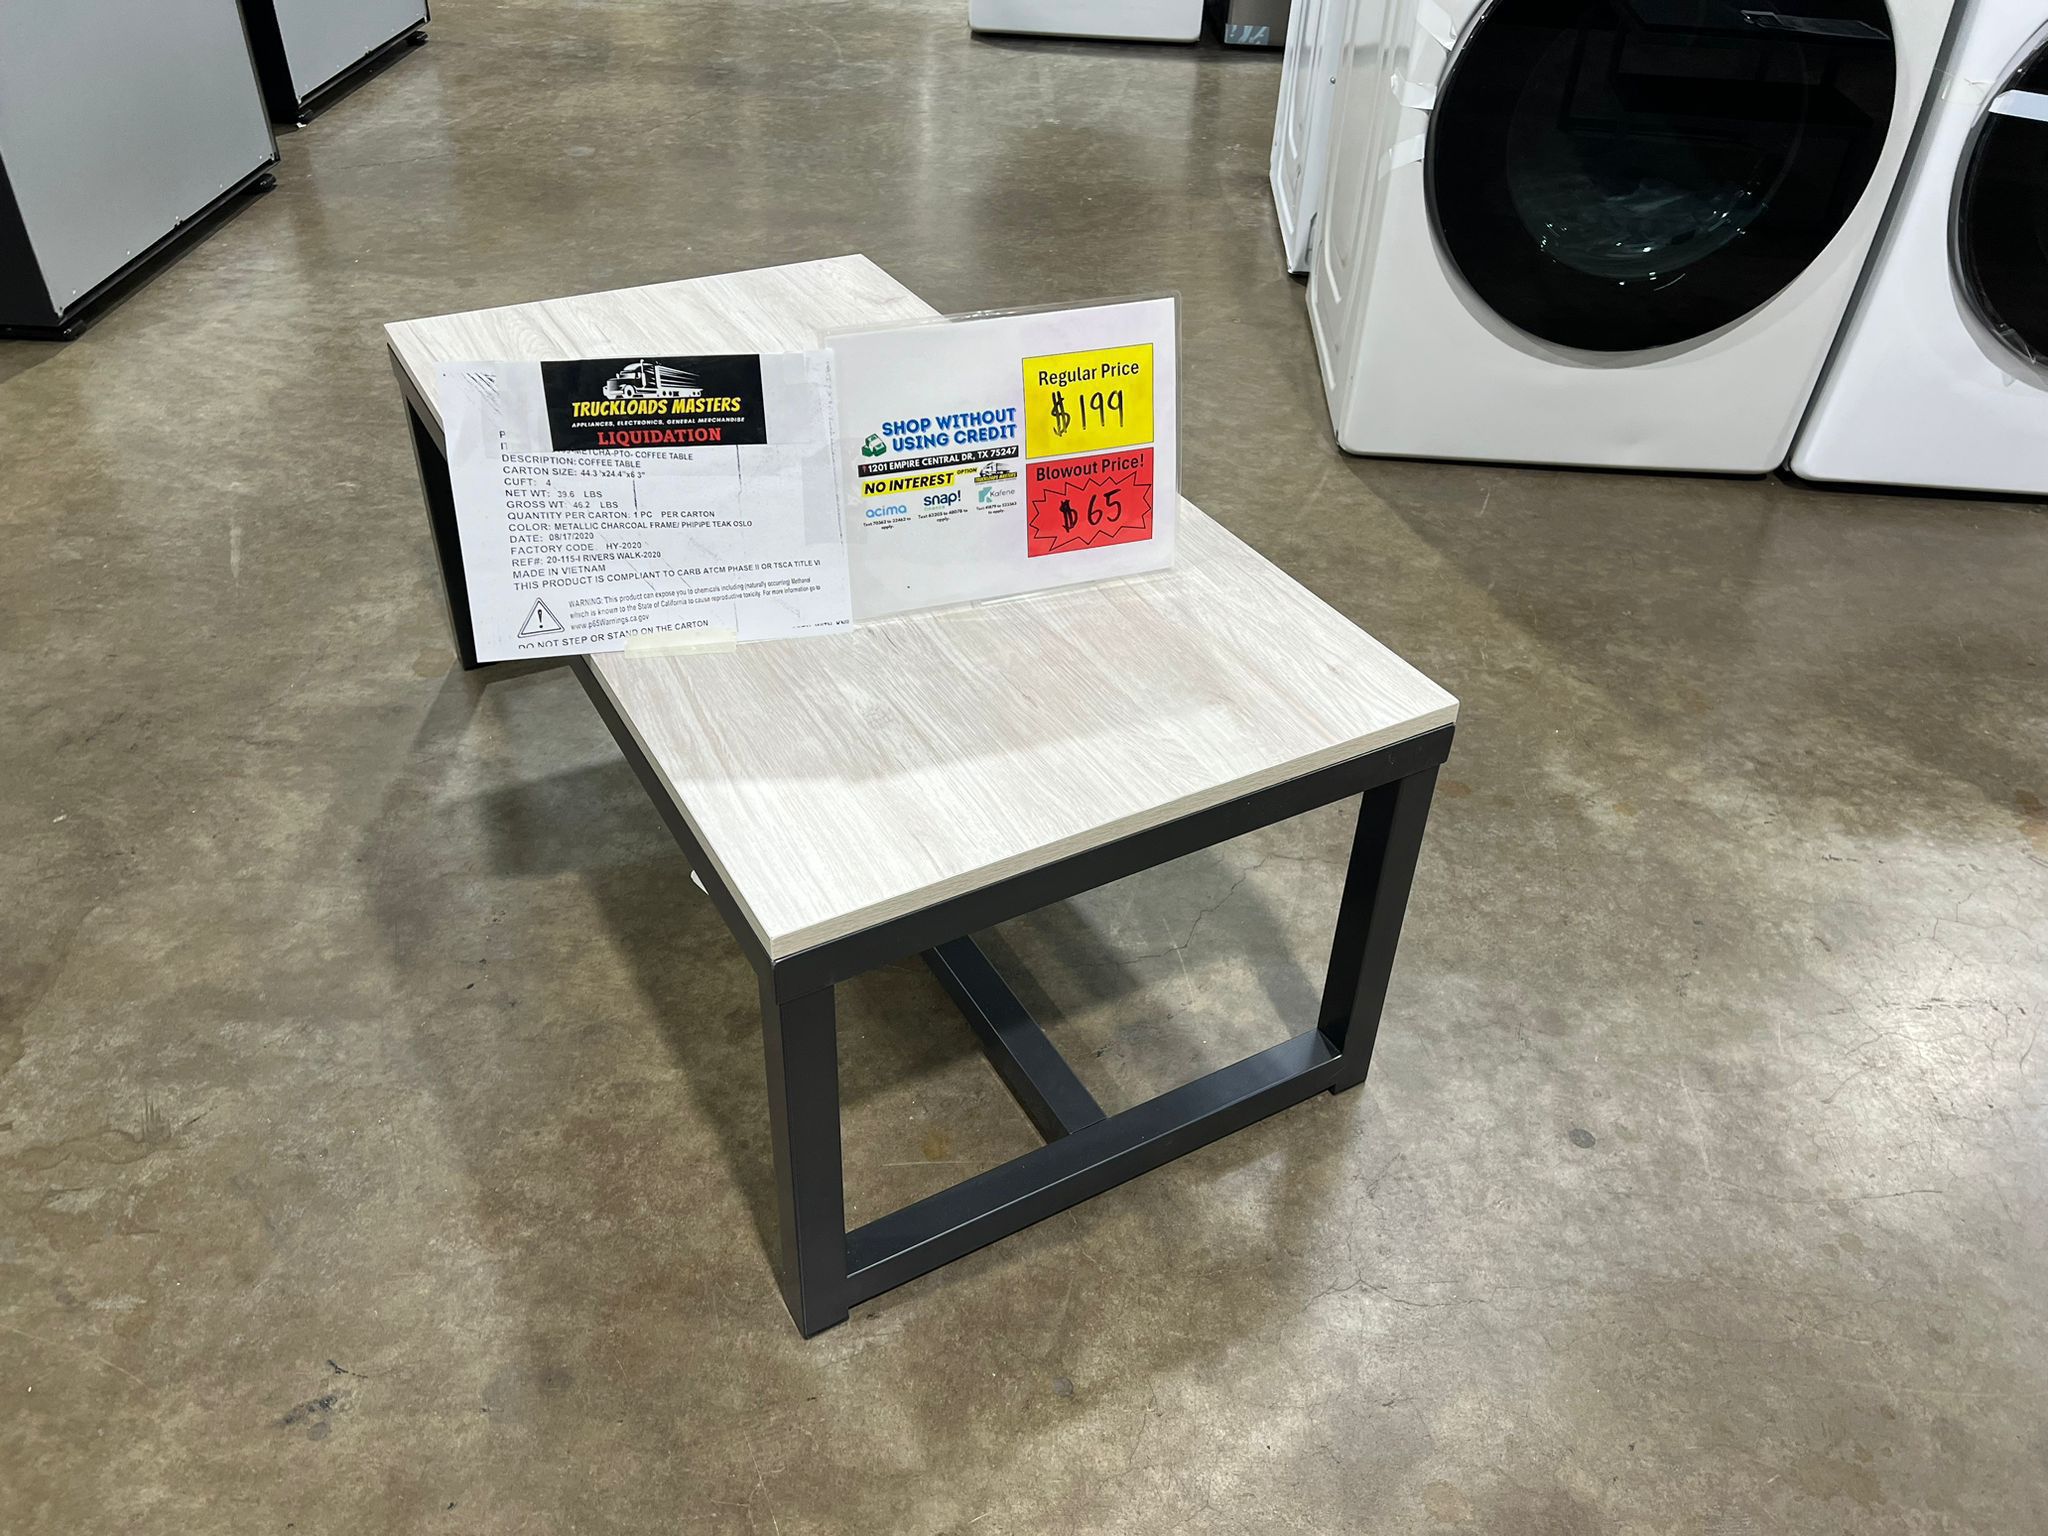 Contemporary Office or Dorm furniture-K Coffee Table-$65!